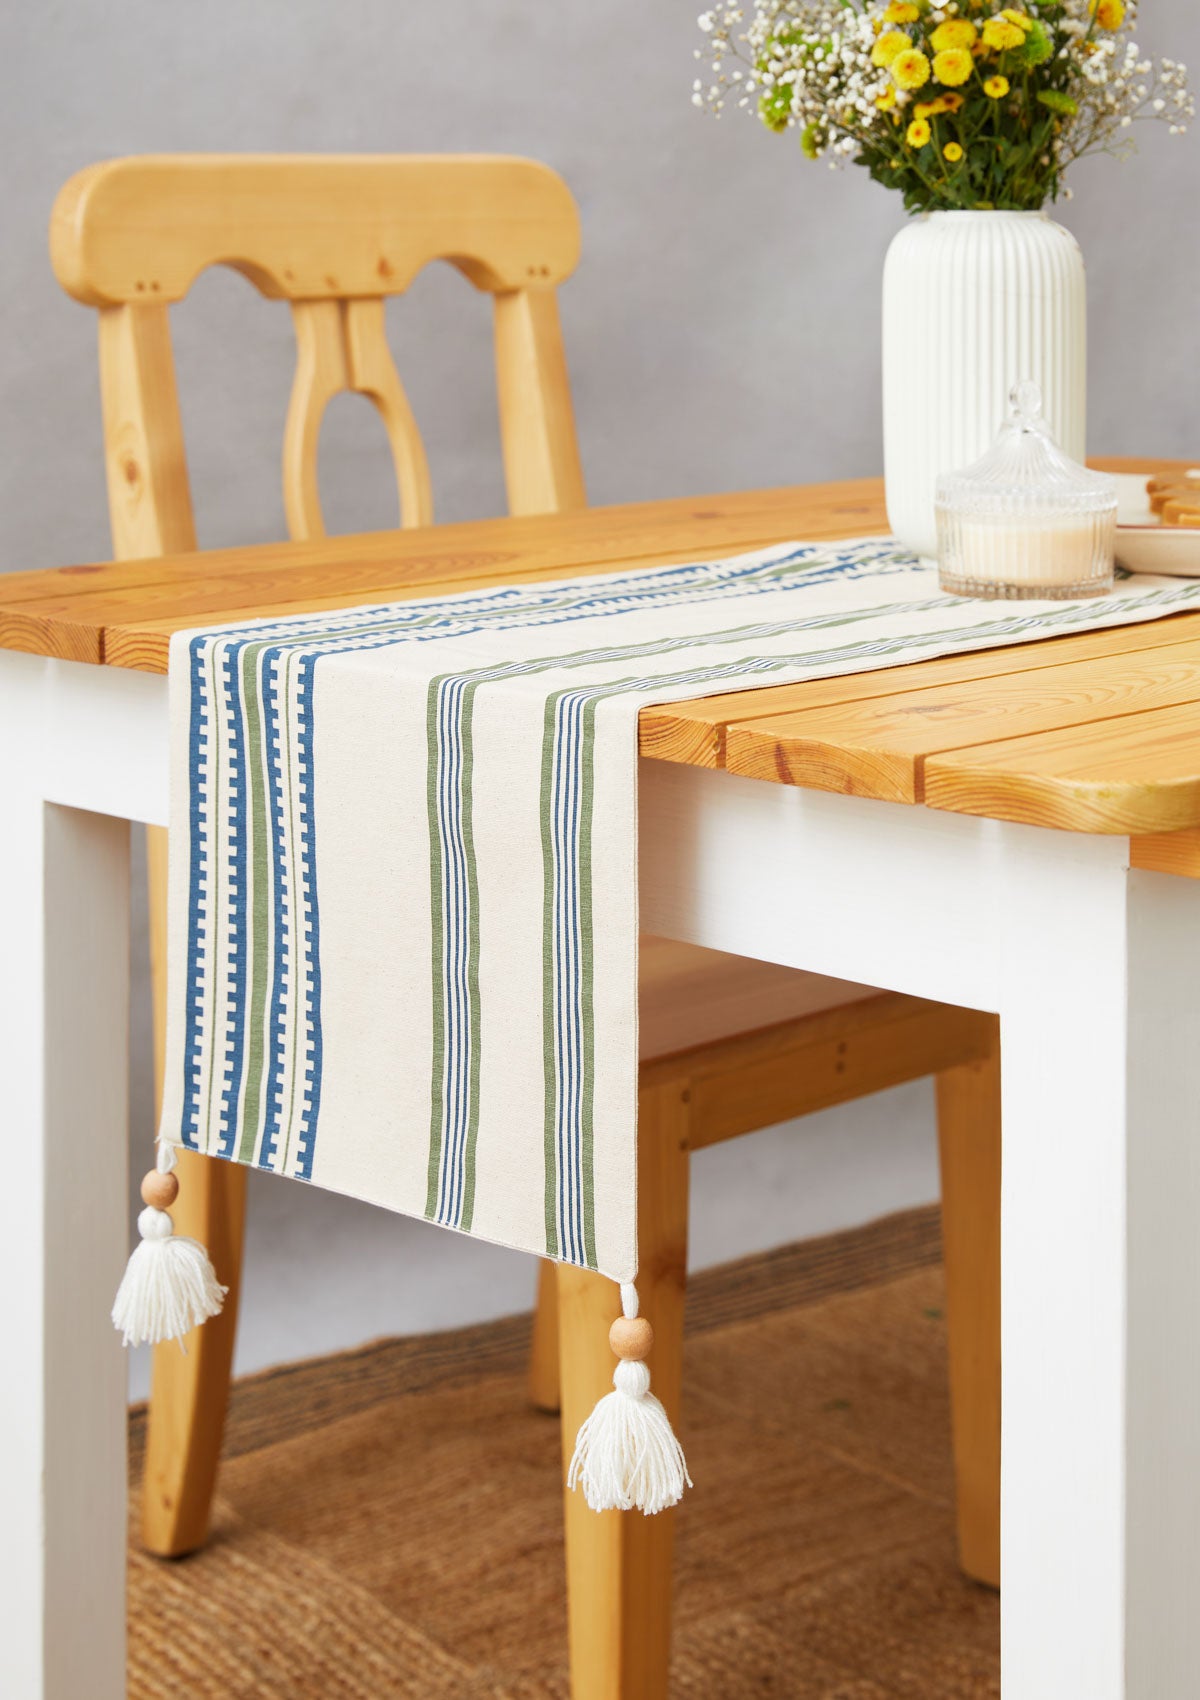 Roman Stripes Printed Cotton Table Runner - Pepper Green and Night Blue